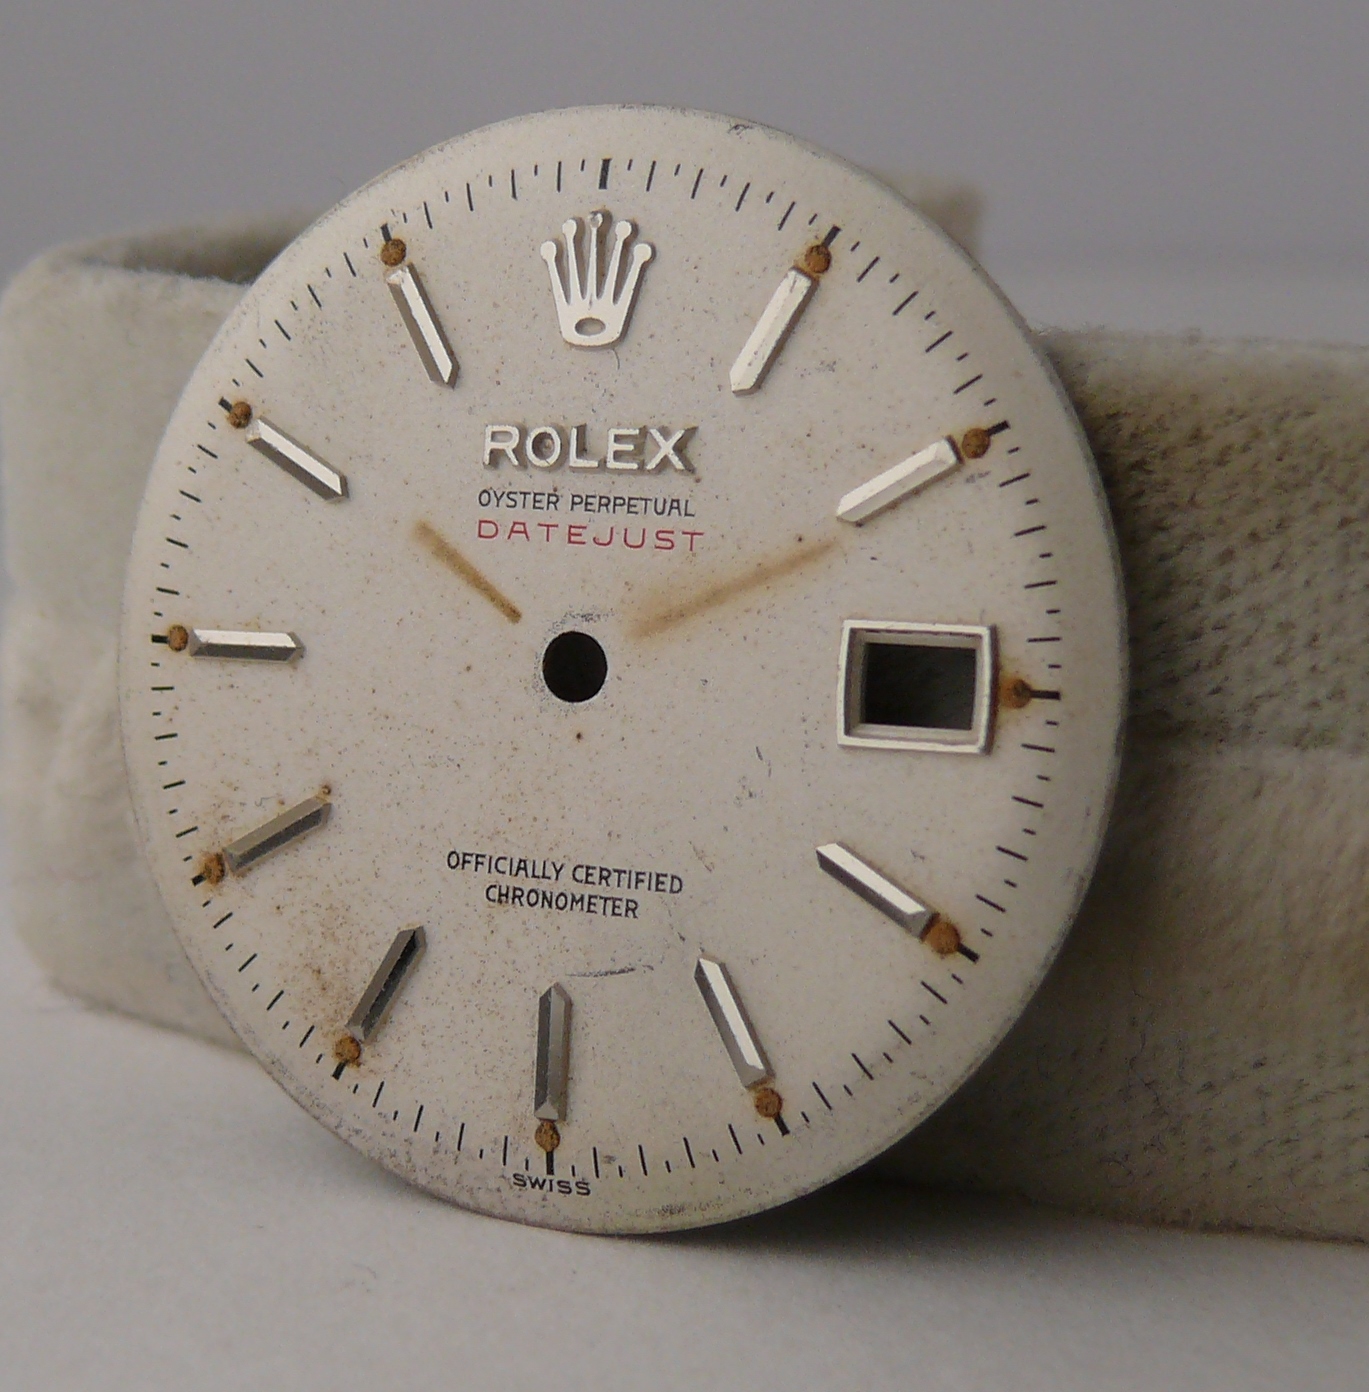 1950s Vintage Rolex Datejust Ovettone Bubbleback 6305 Dial. Please note the dial is completely